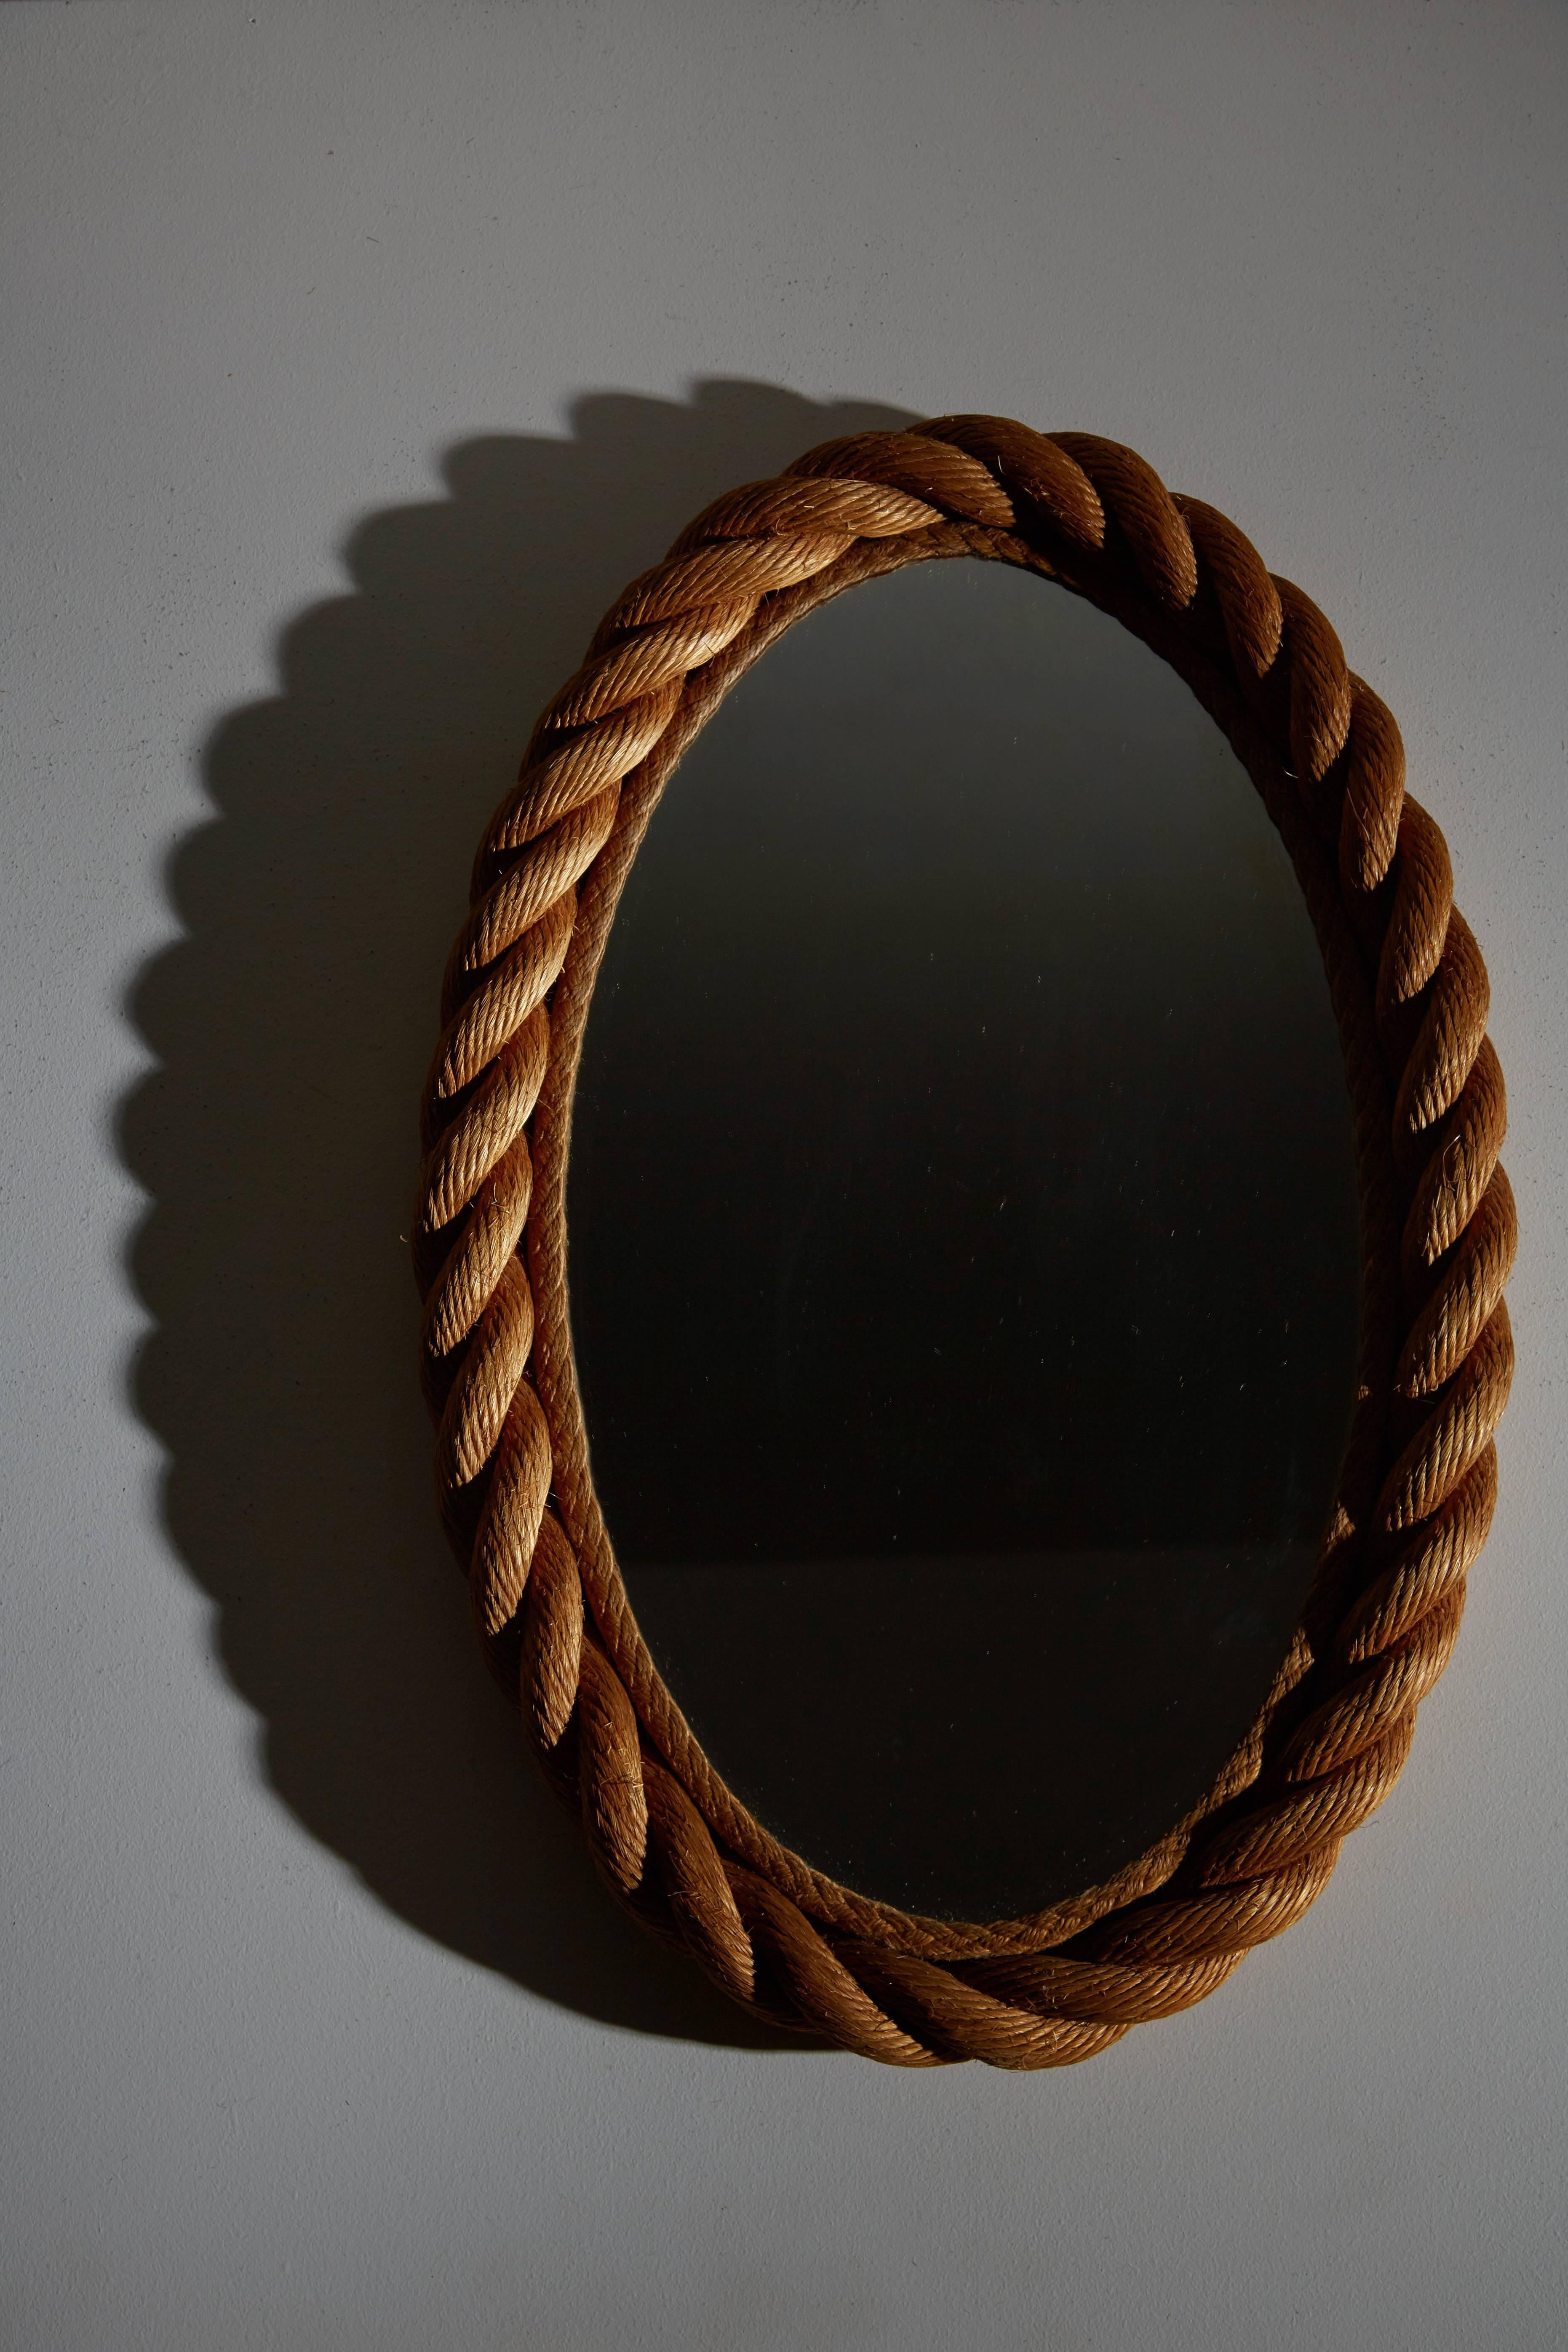 Oval rope mirror by Audoux Minet. Simple frame made of woven abaca in Golfe-Juan, France, circa 1950s.